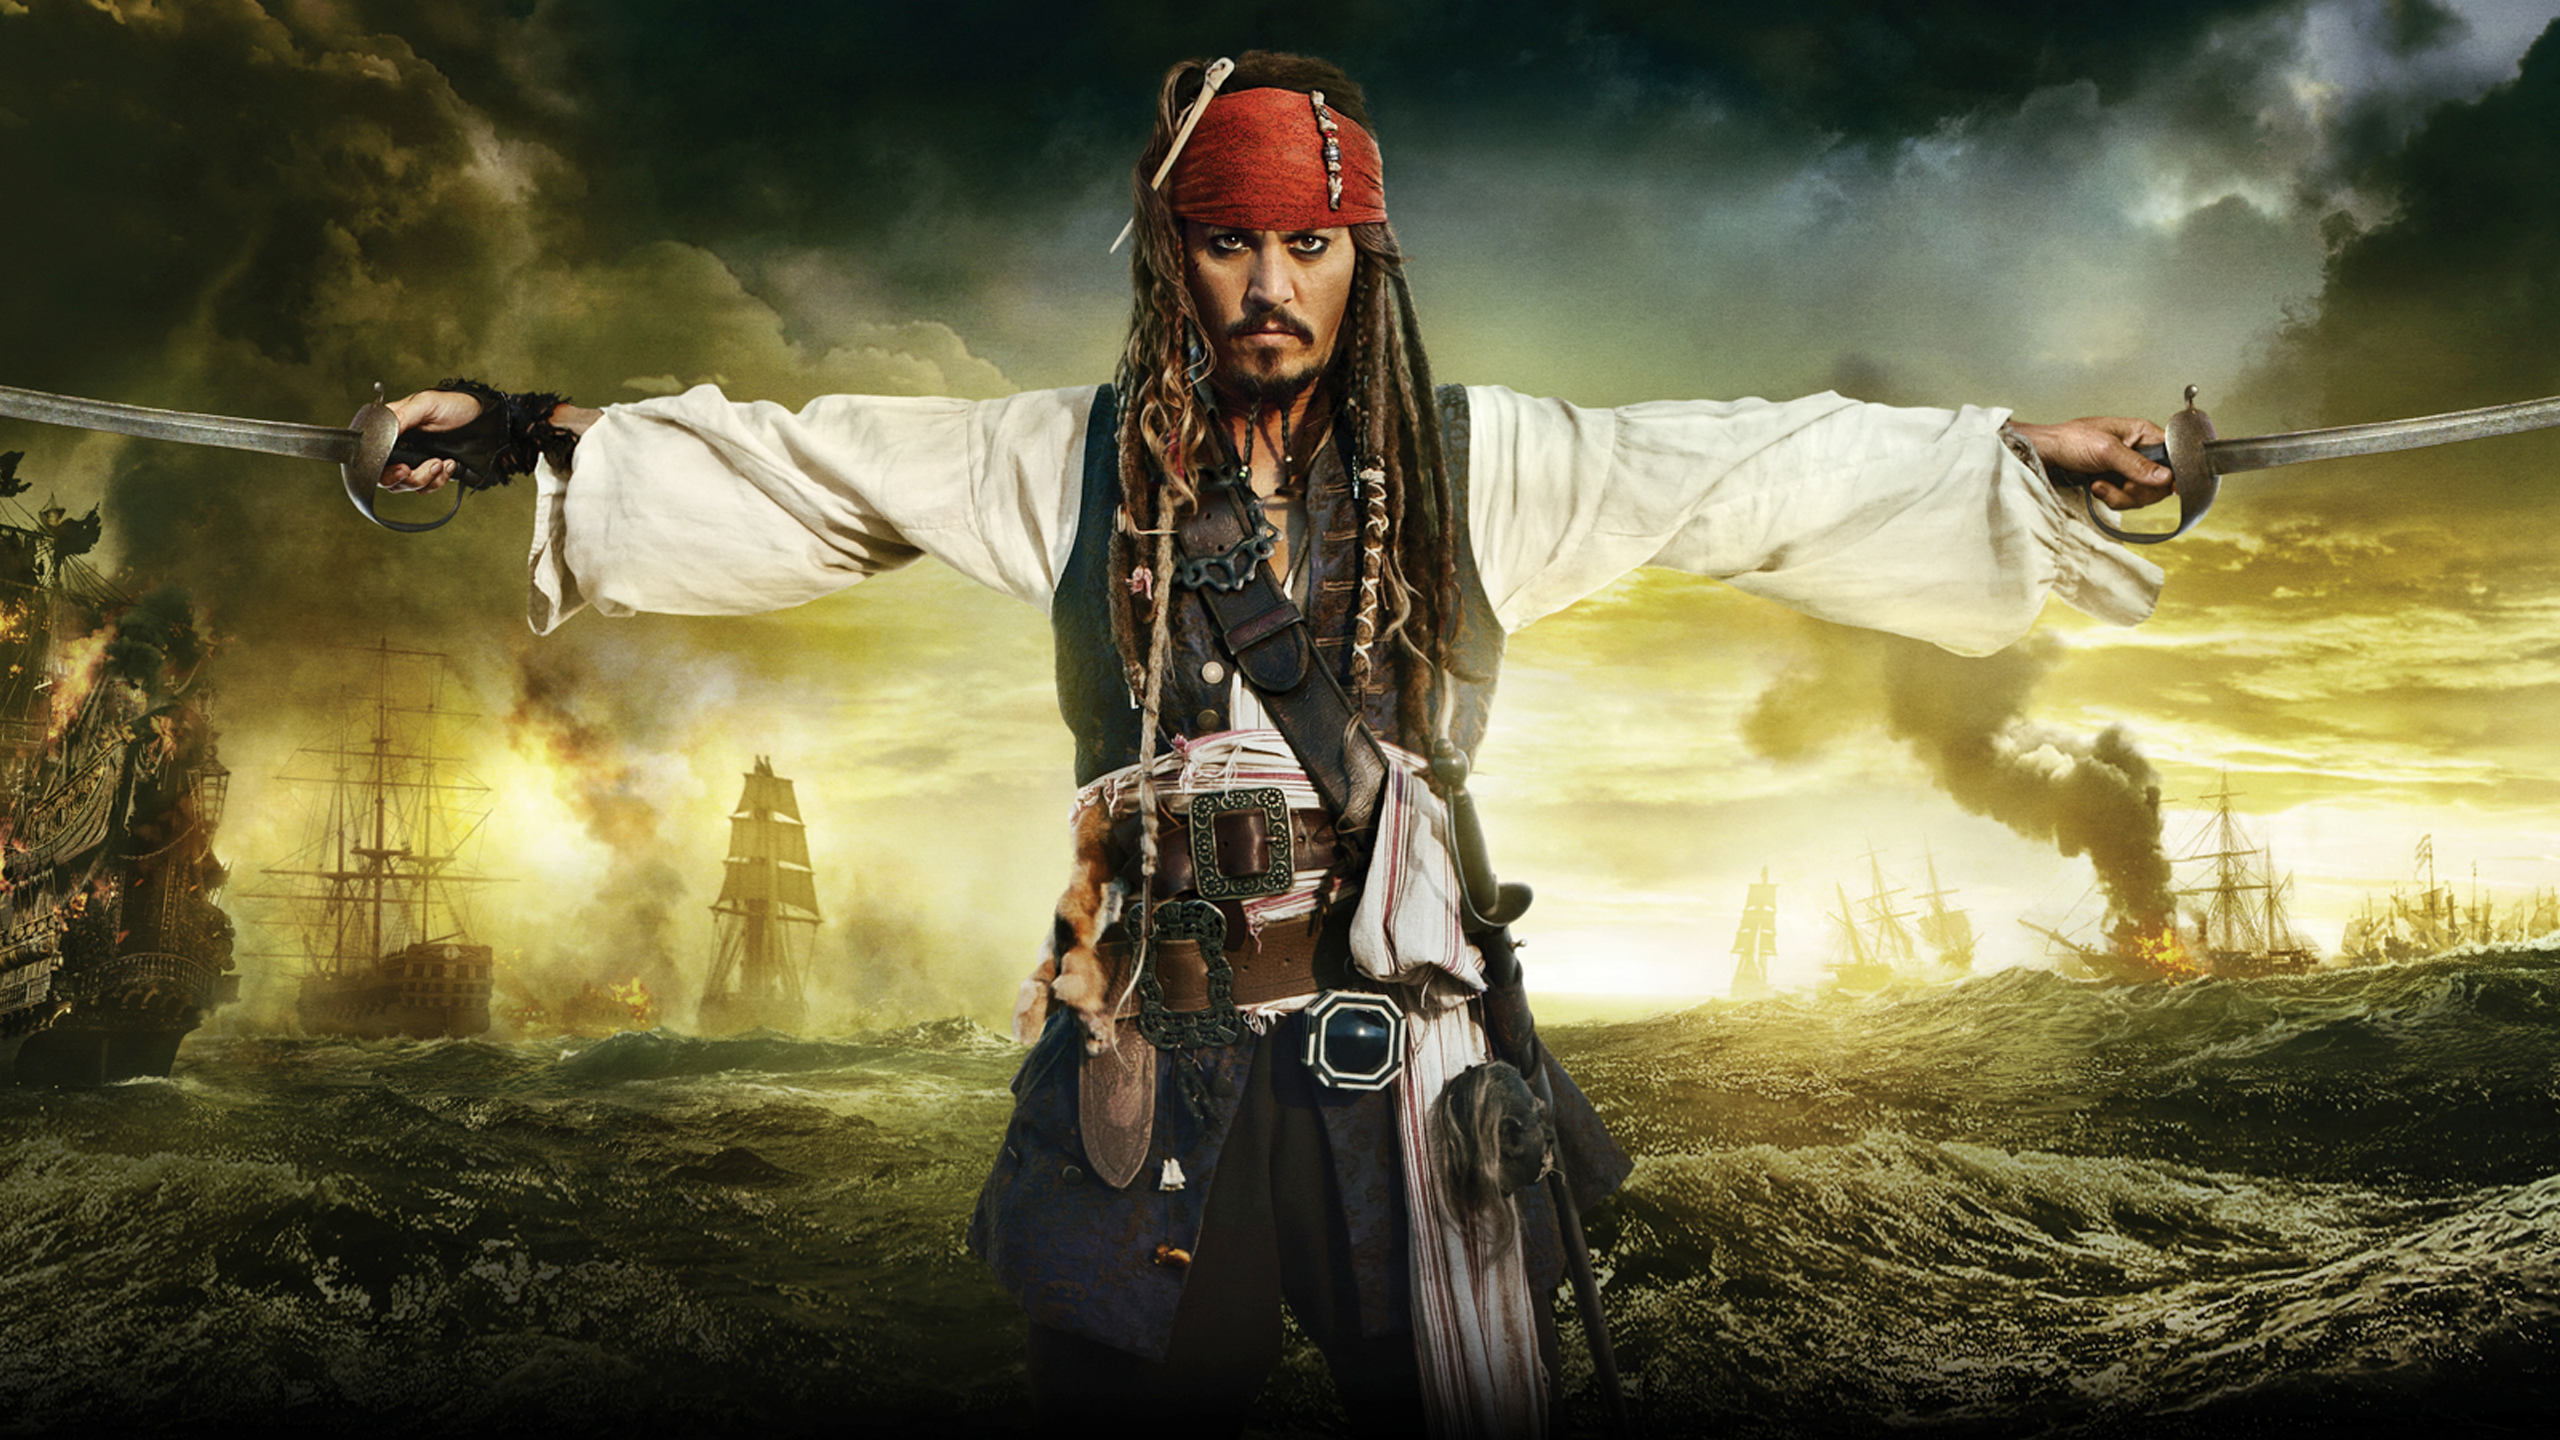 watch pirates of the caribbean stranger tides online hd